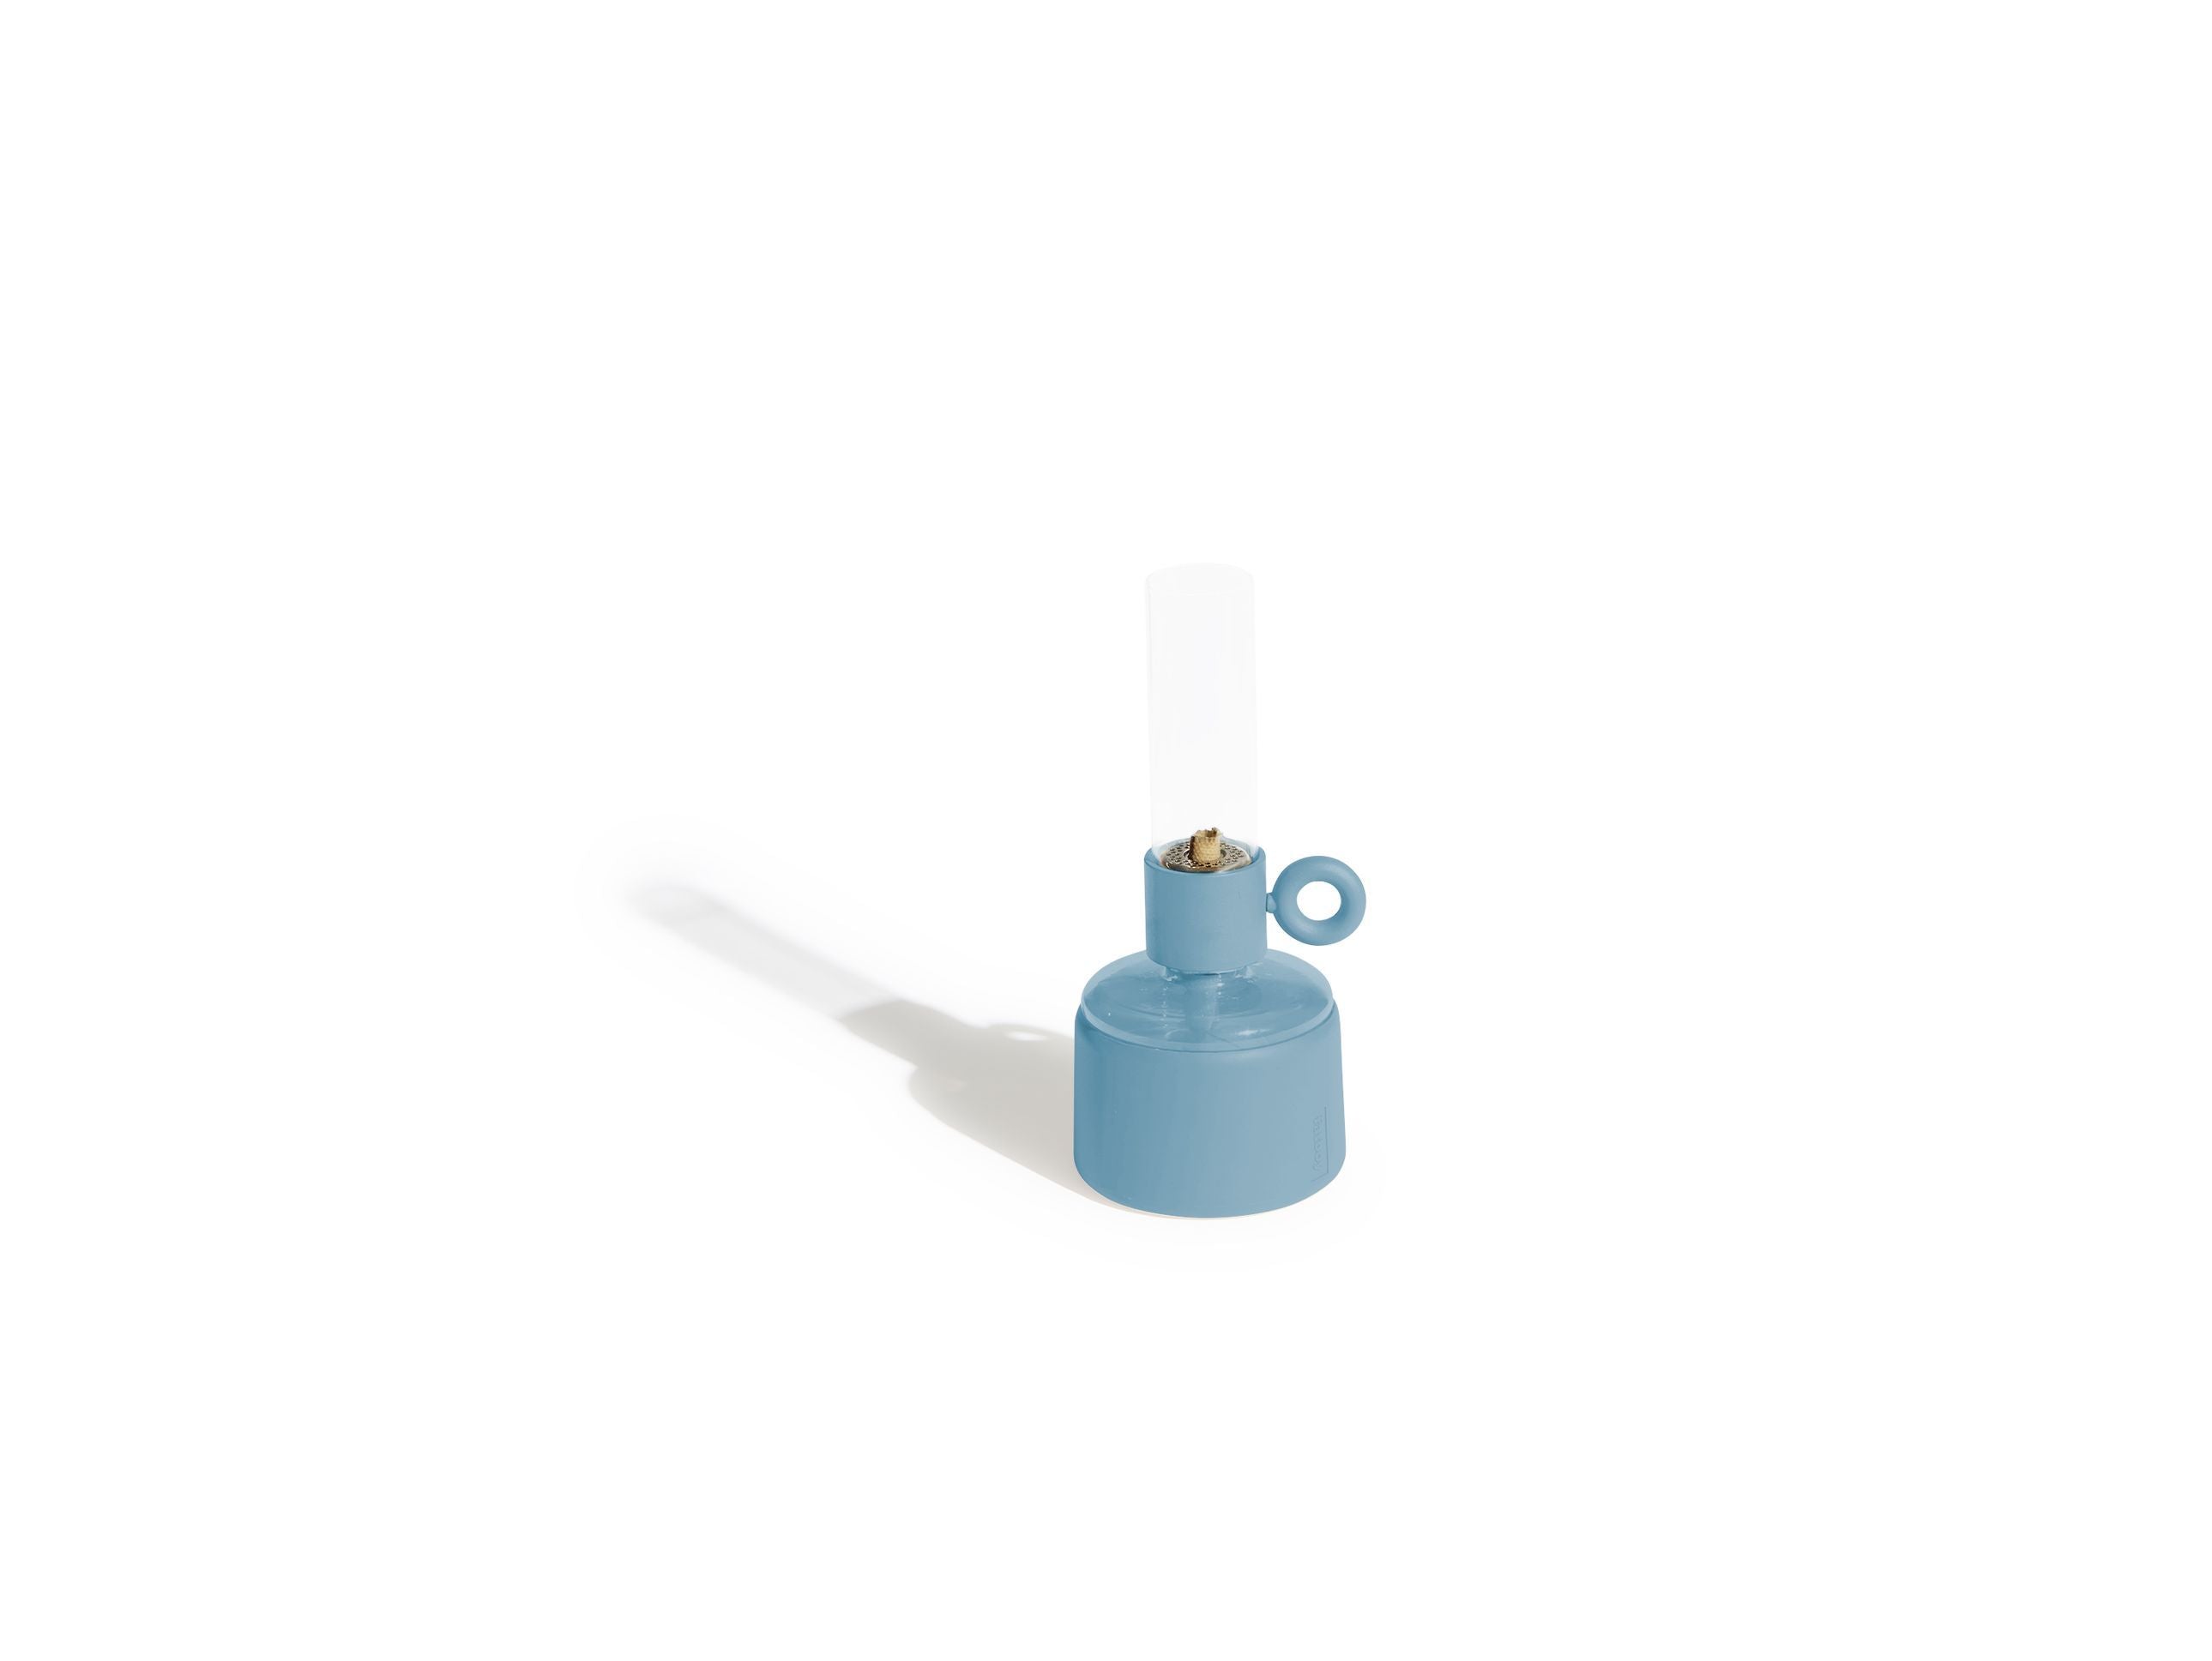 Fatboy Flamtastique Xs Oil Lamp, Ice Blue